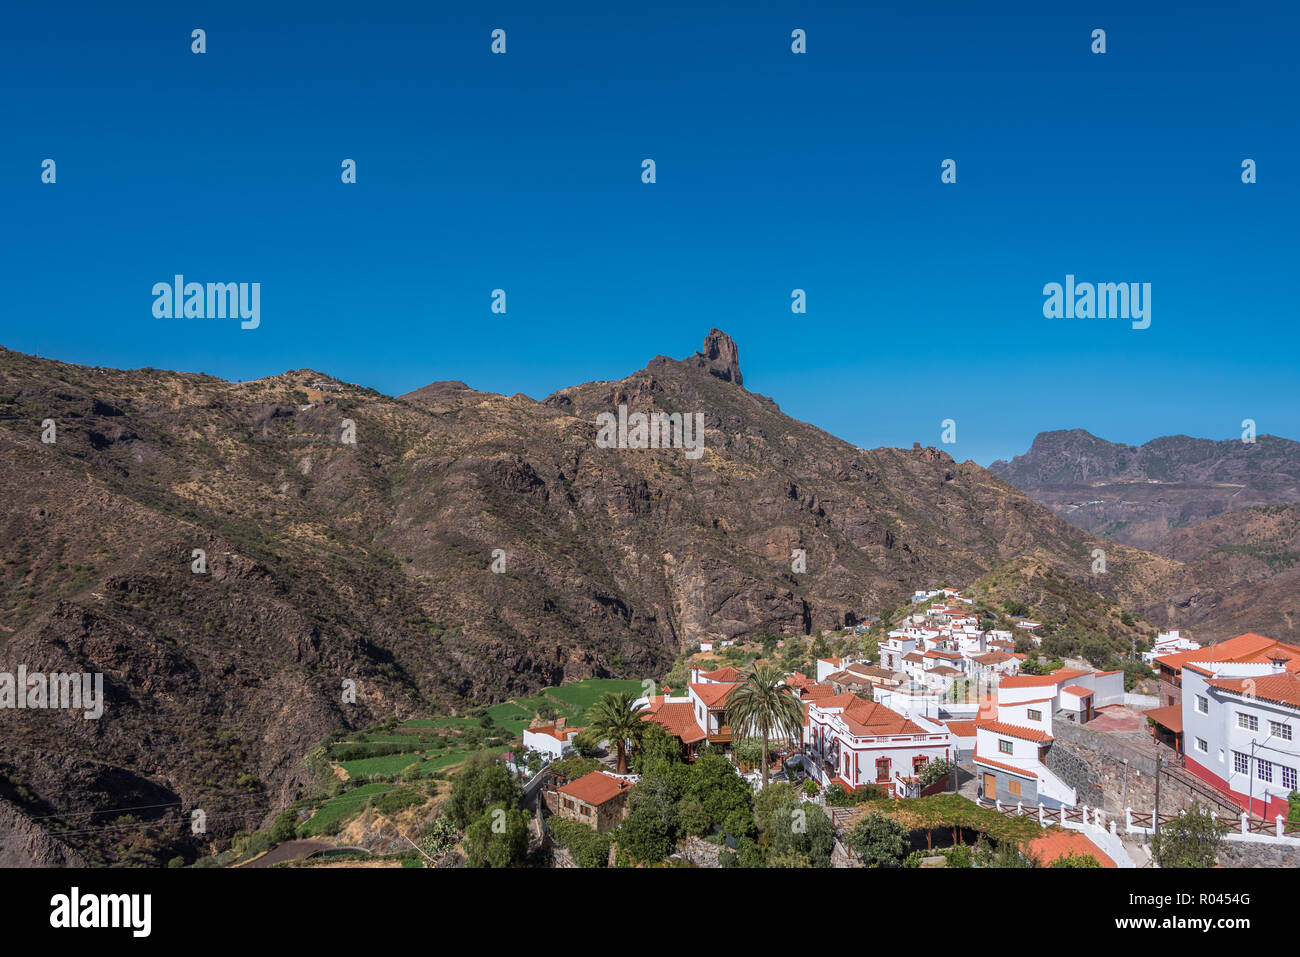 View of the village with mountain, Tajeda, Gran Canaria, Canary Islands, Spain. Stock Photo